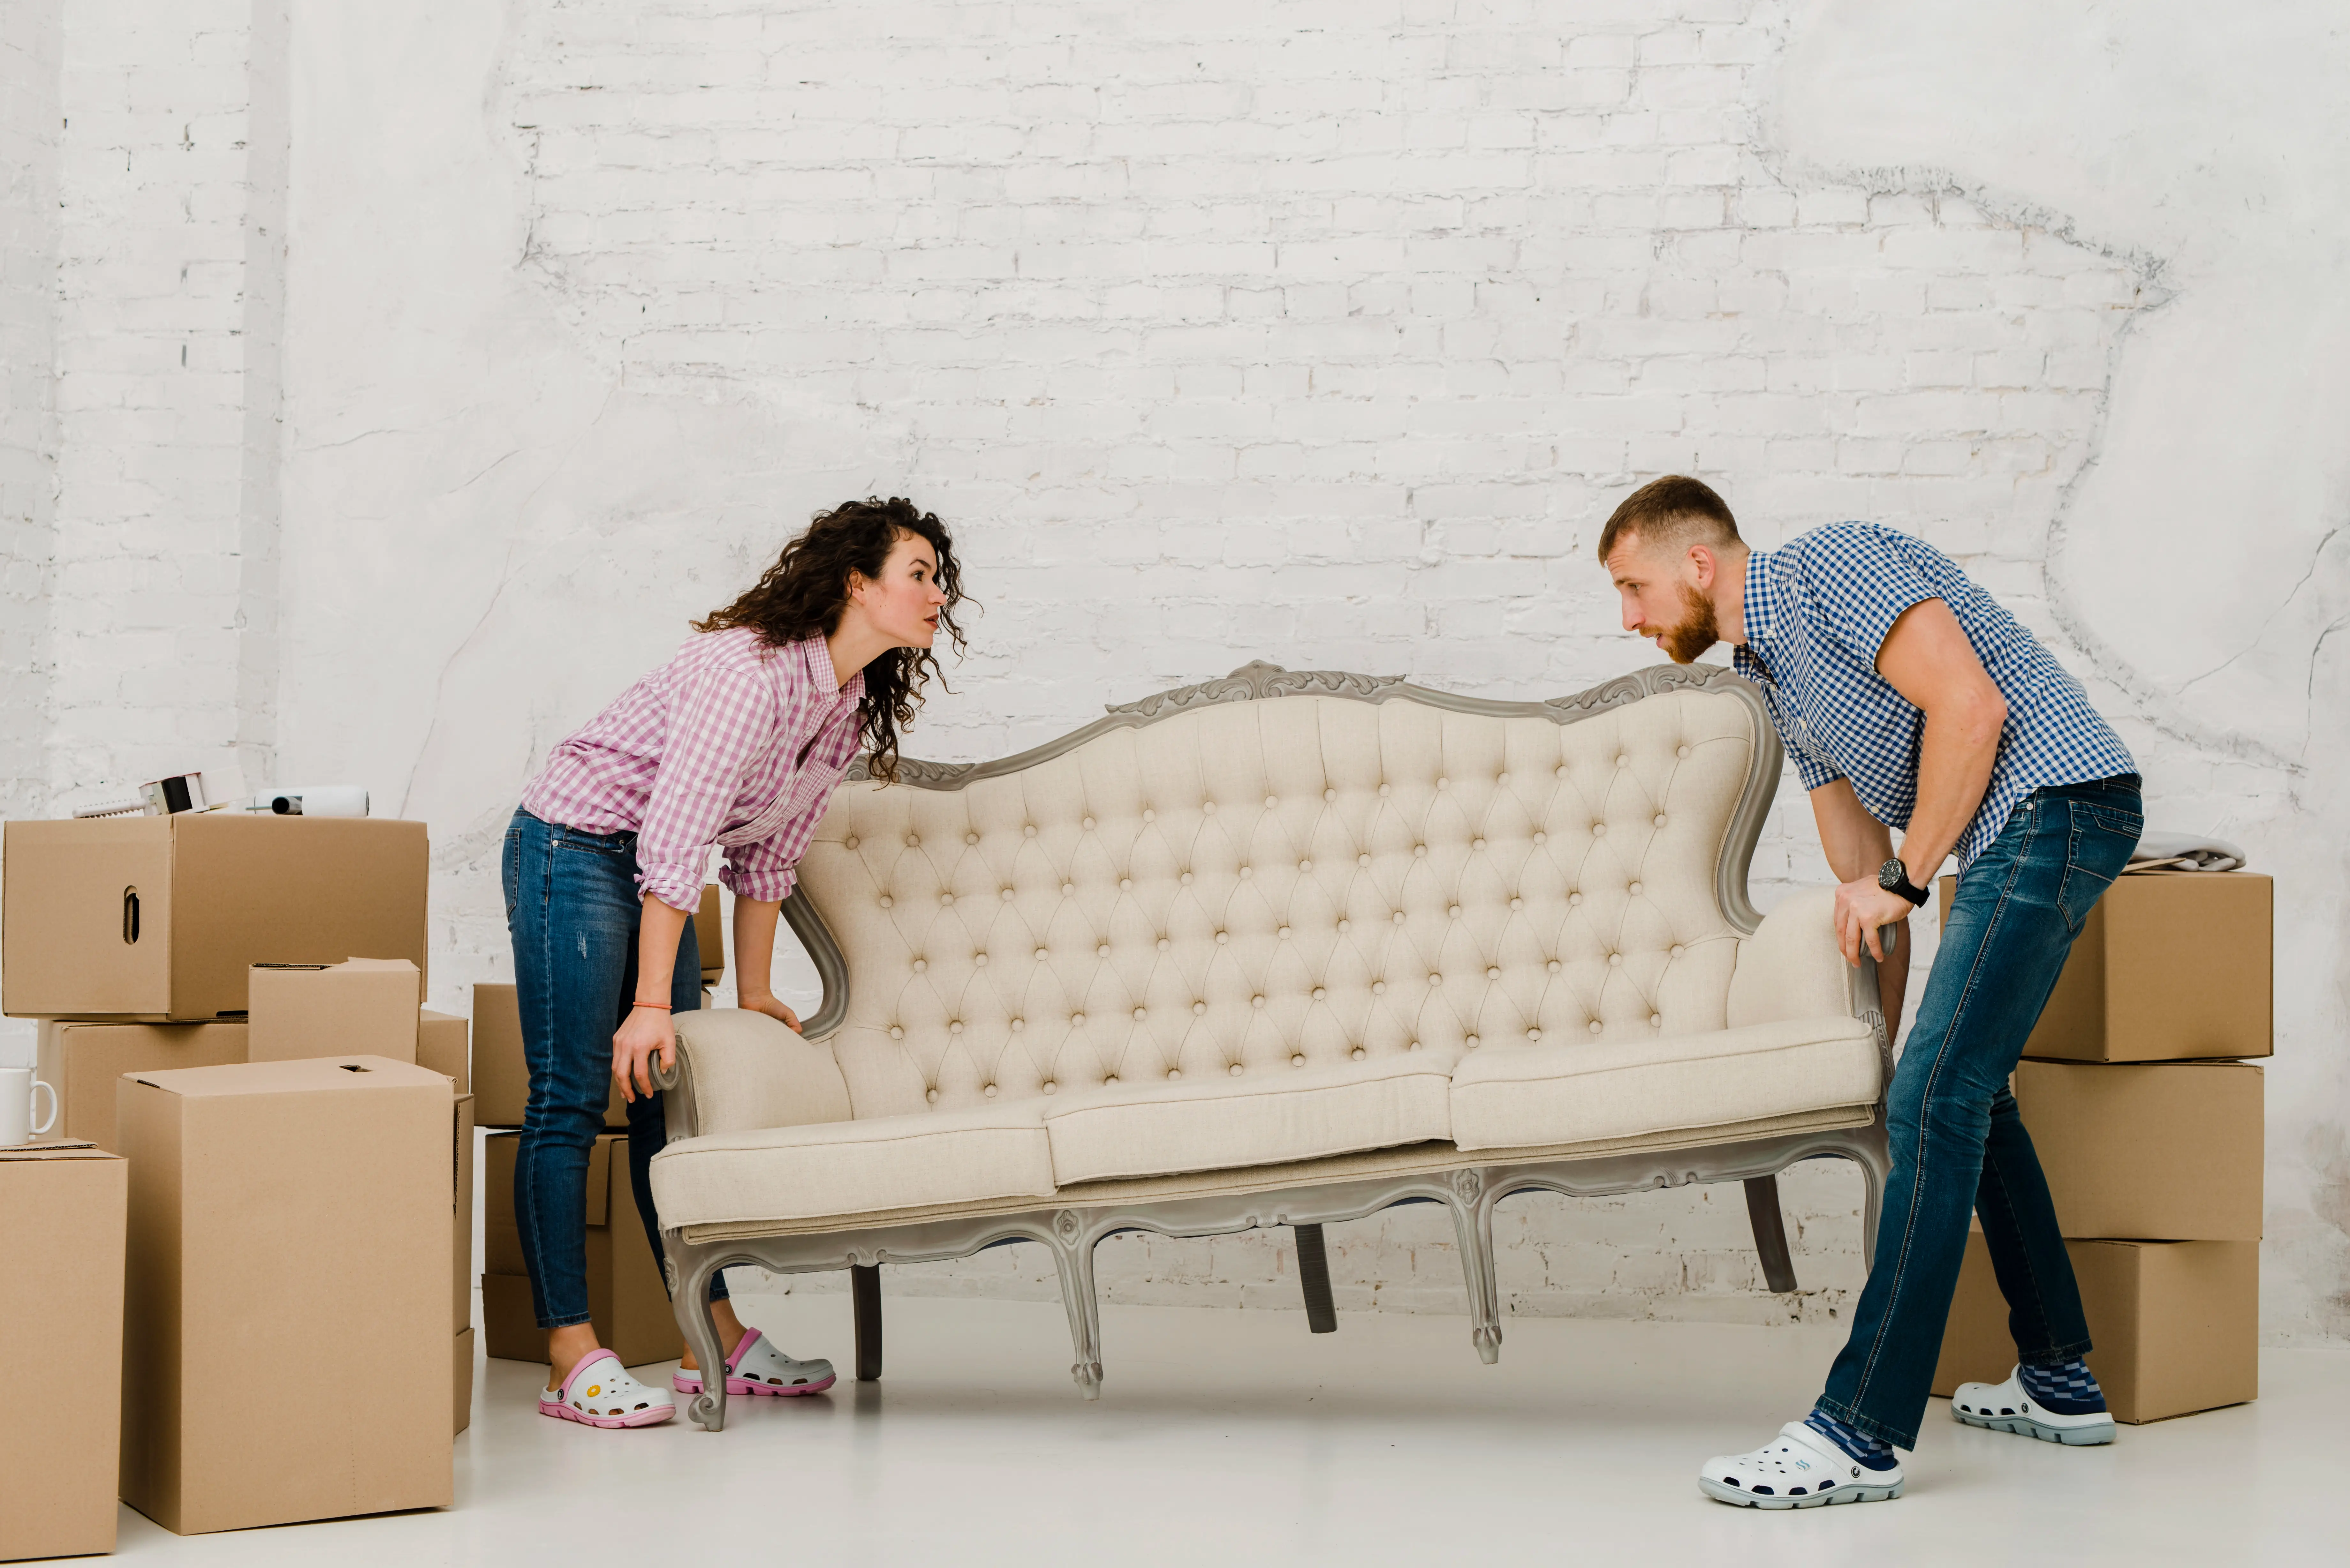 Hire our professional movers in Jersey City to avoid complexities of DIY moves